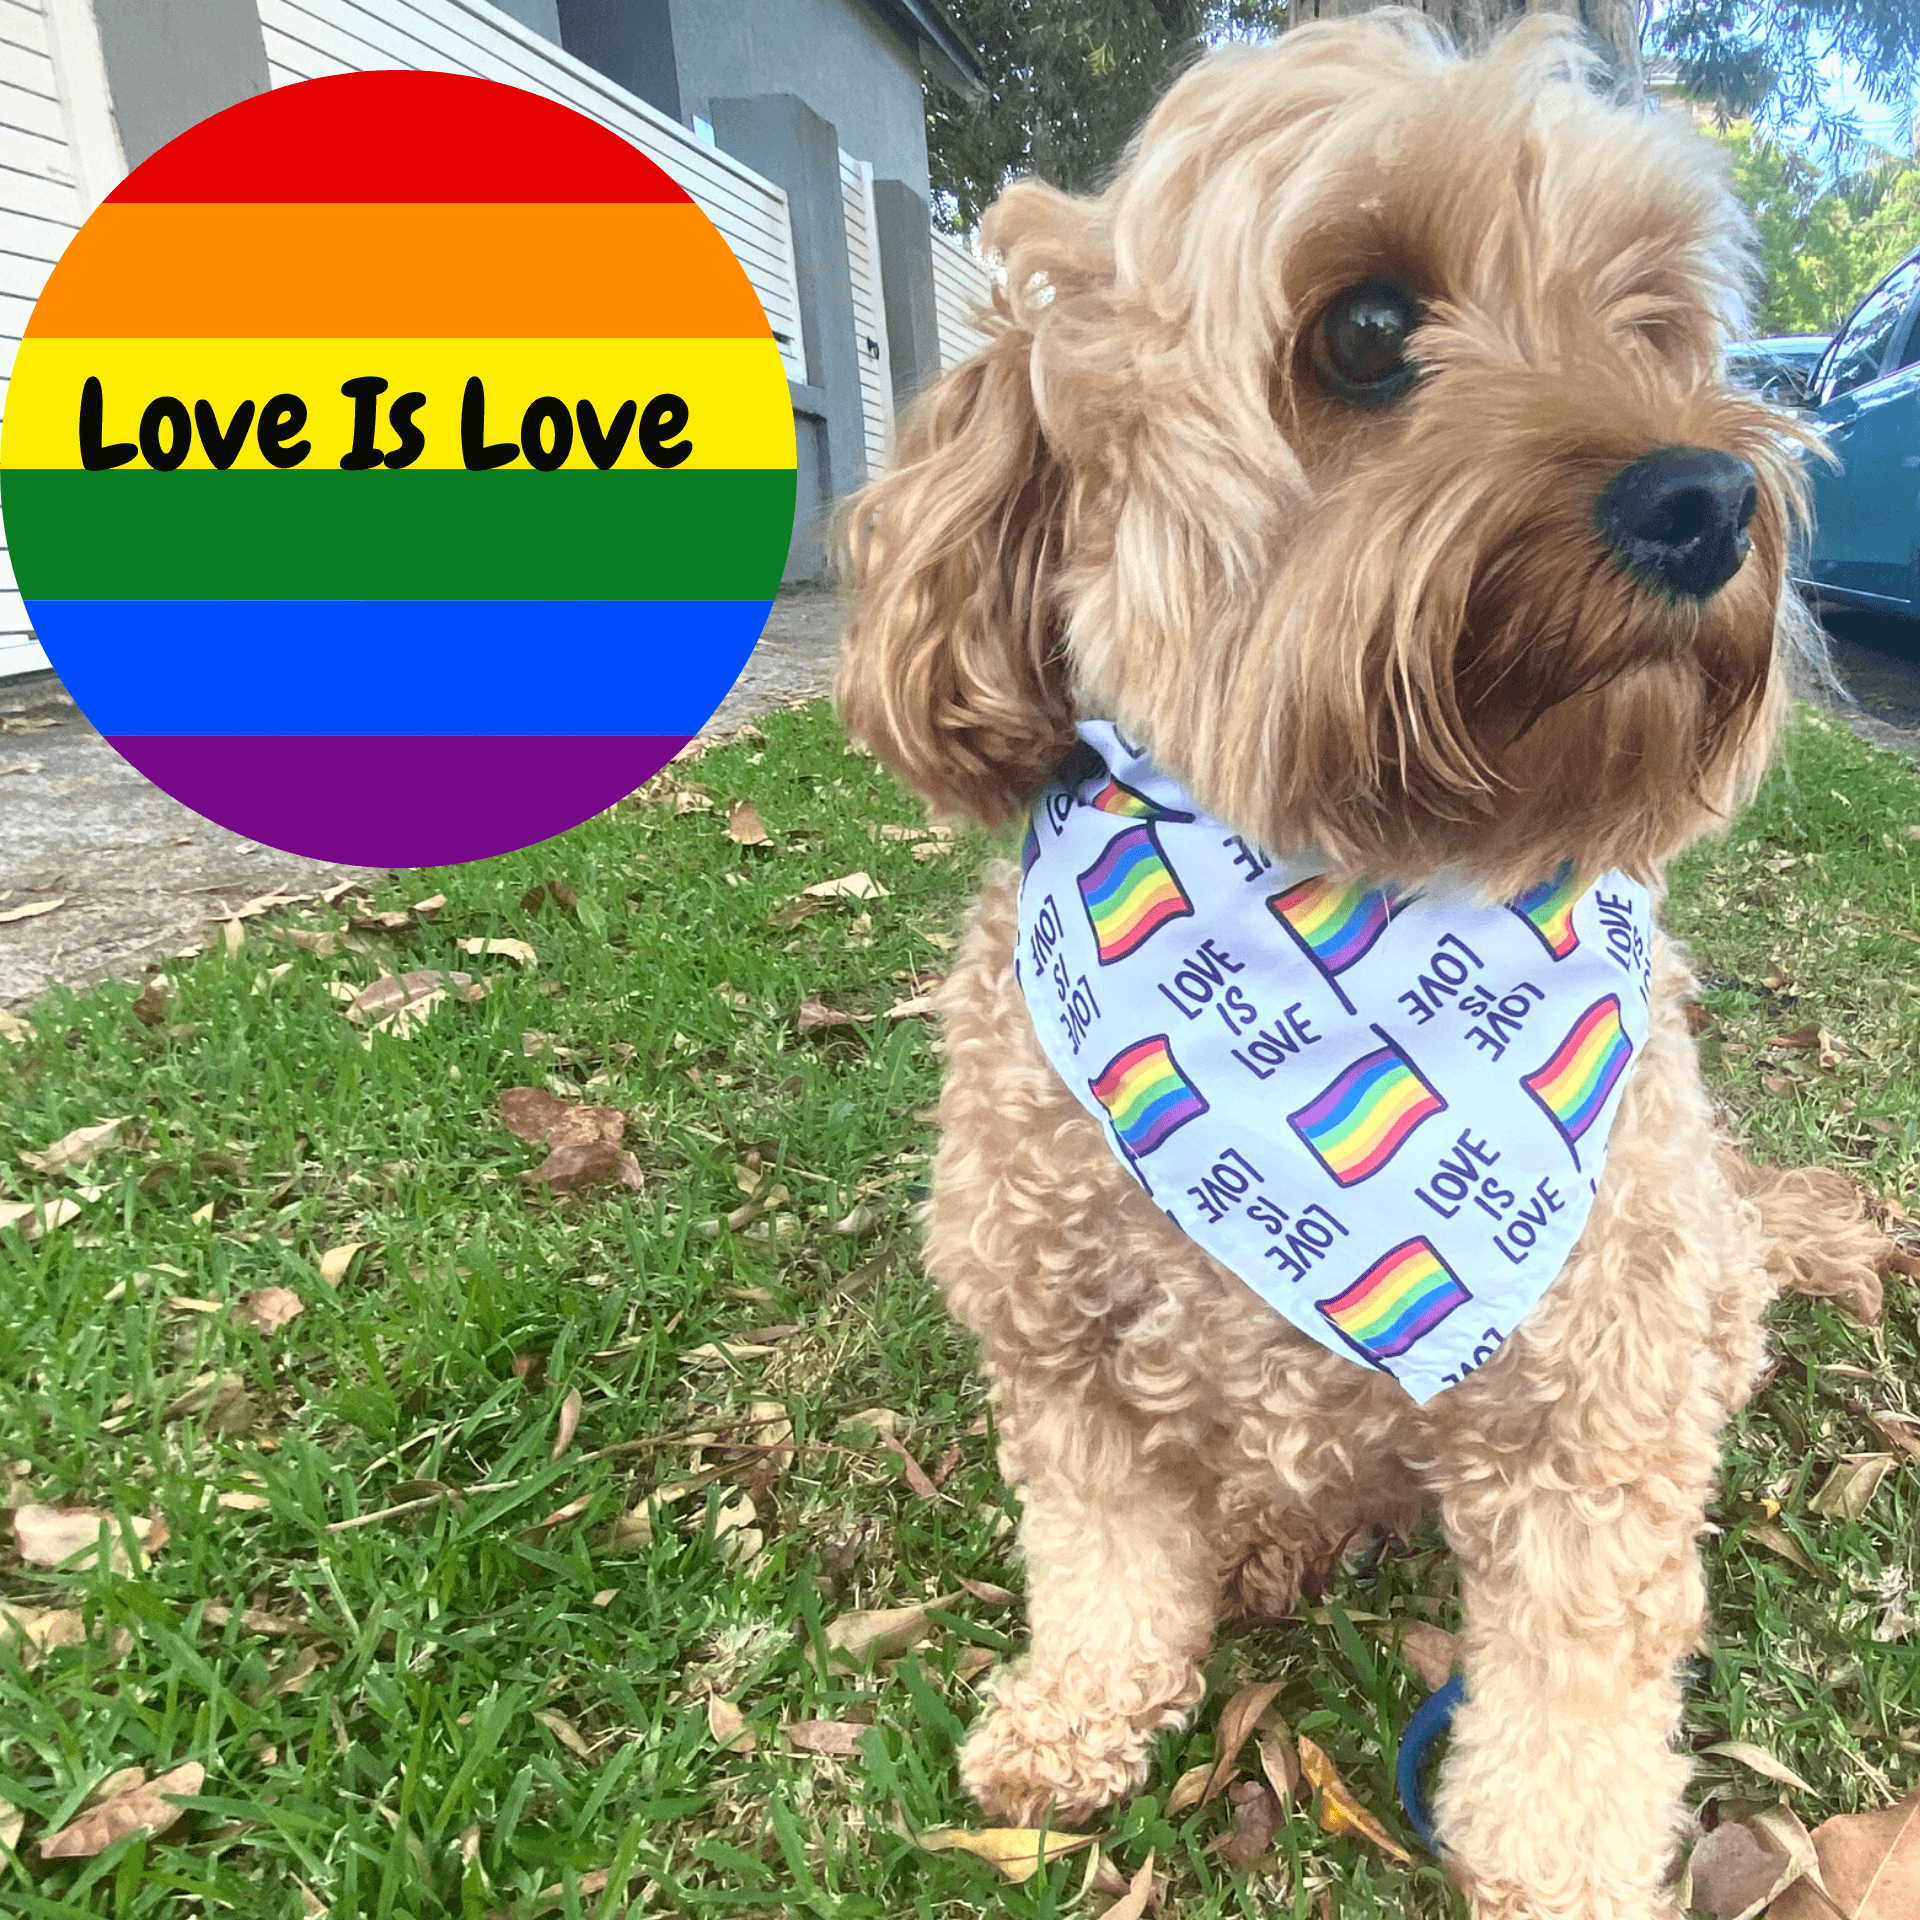 Love is love tie-up dog bandana fashion dog accessory, let's pawty